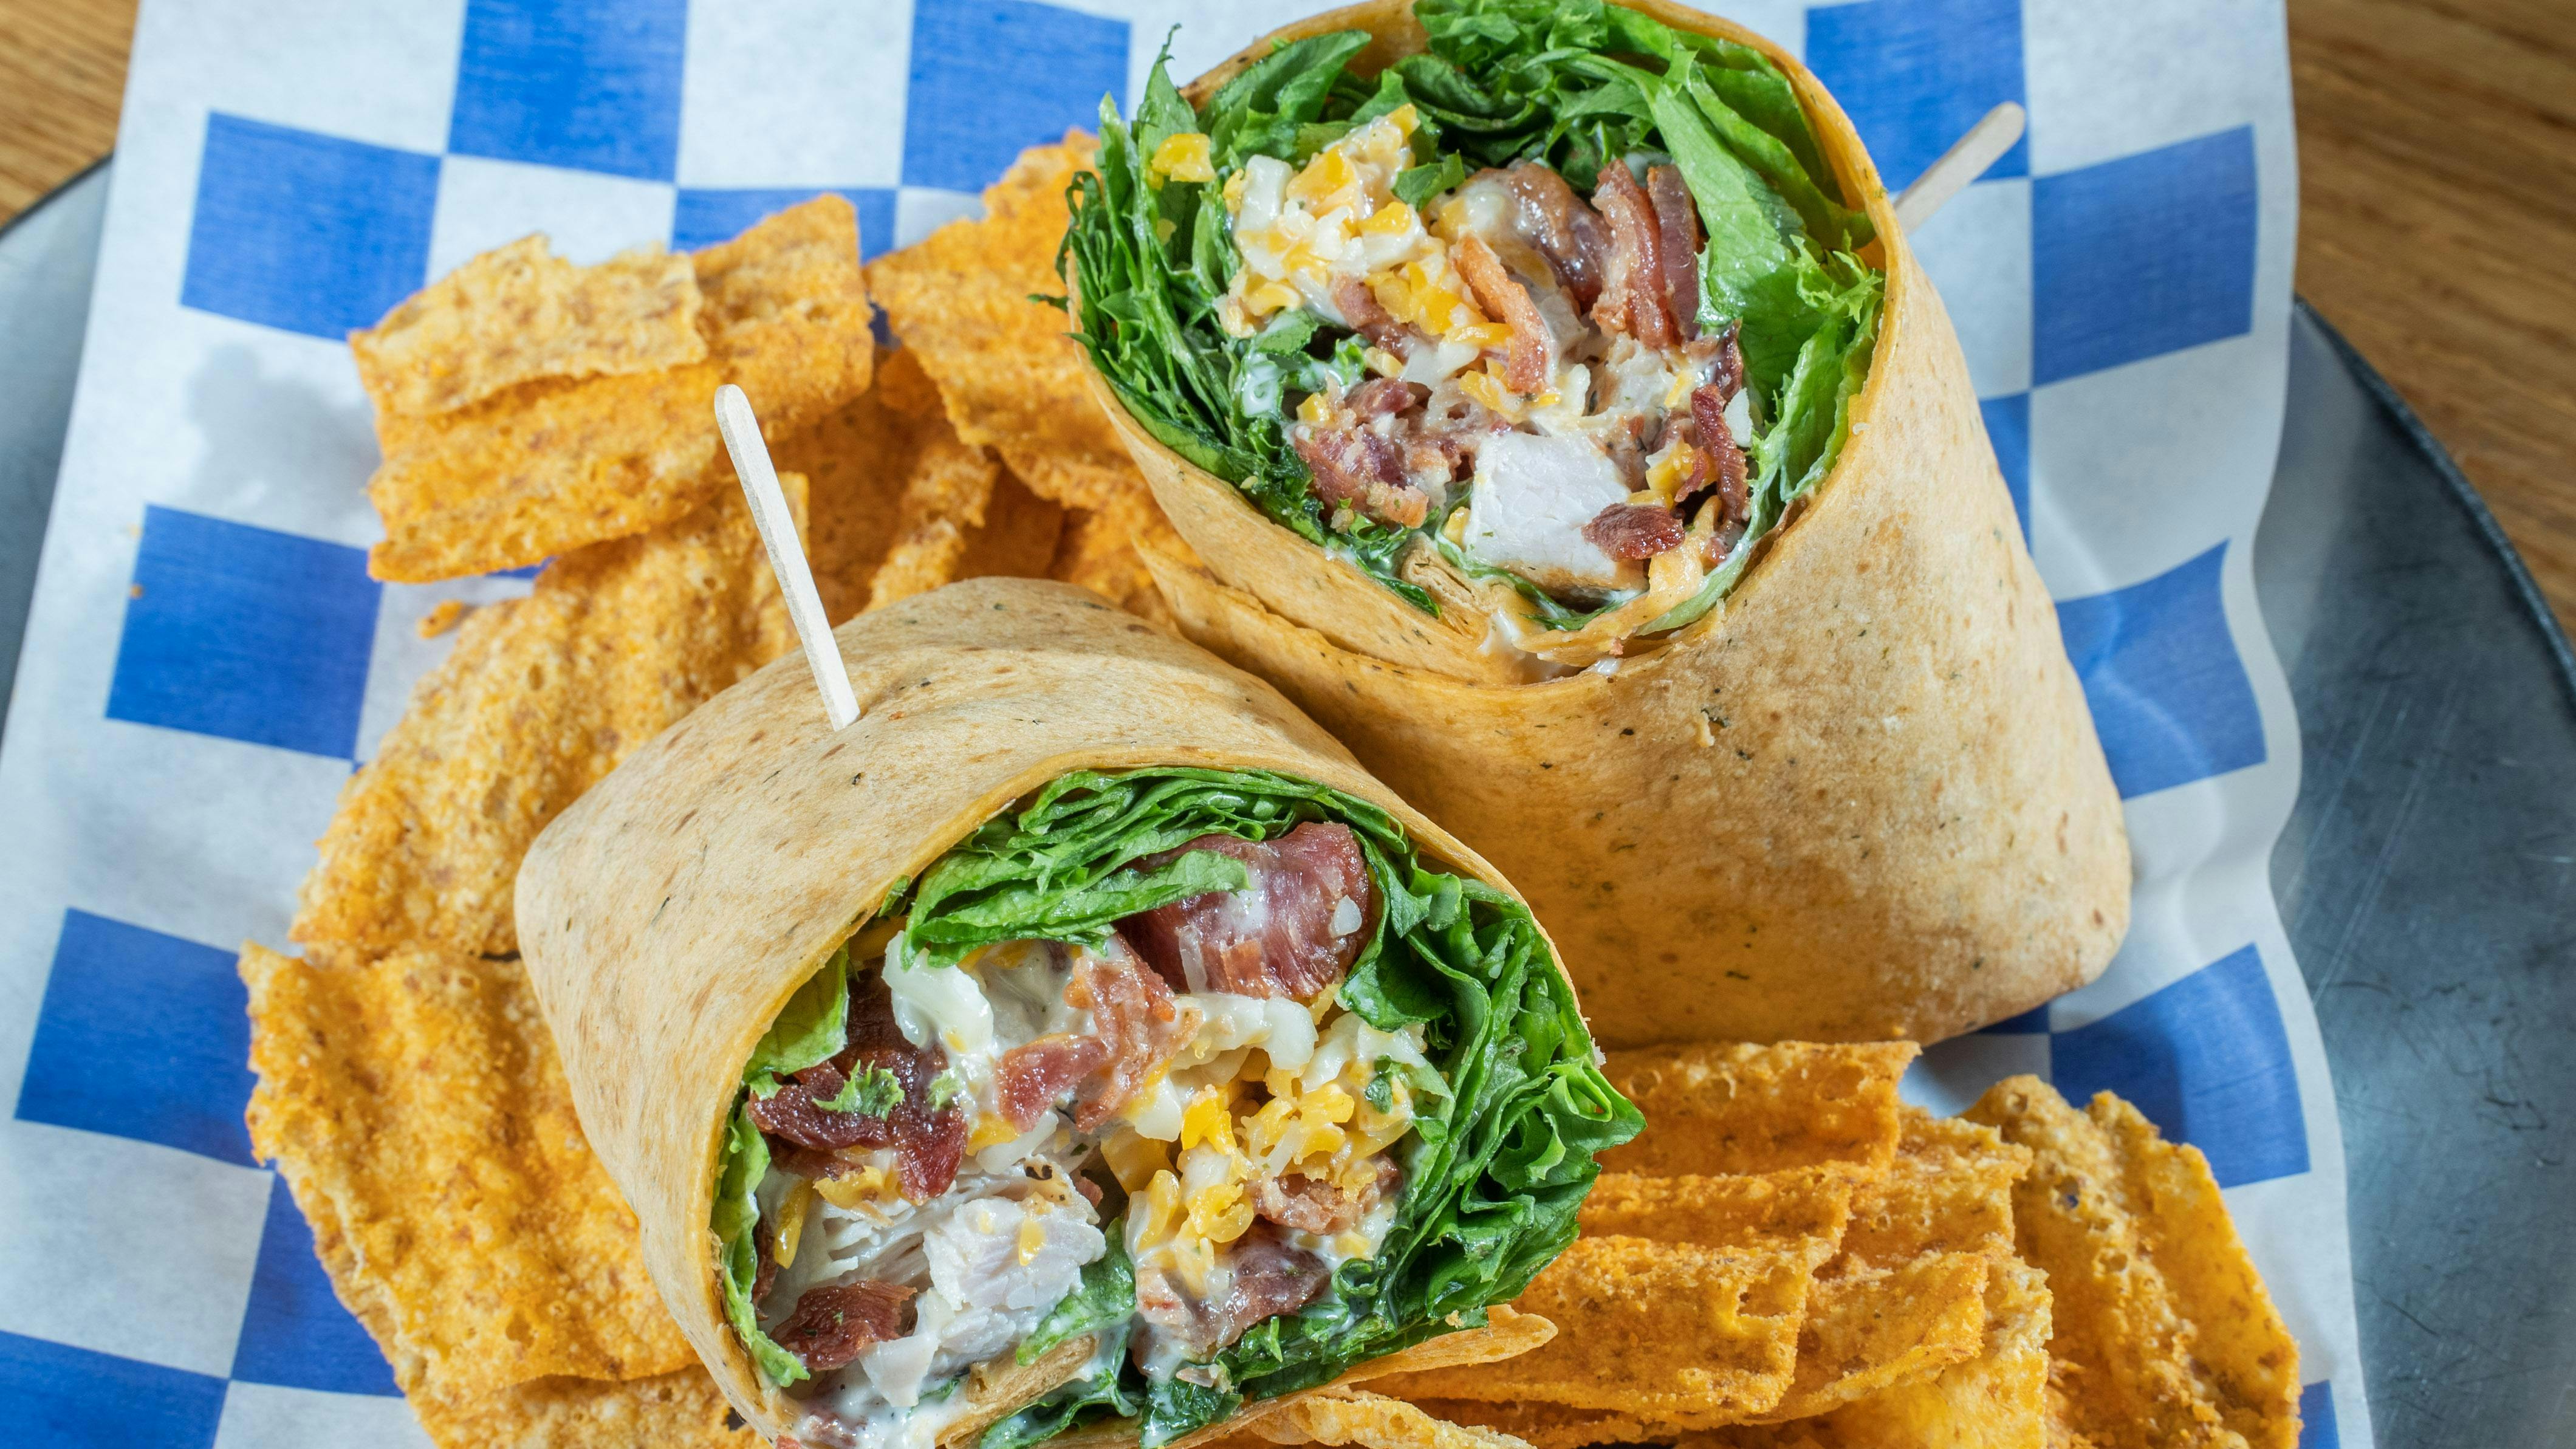 Chicken Bacon Ranch Wrap from Austin Salad Company - East 6th St in Austin, TX